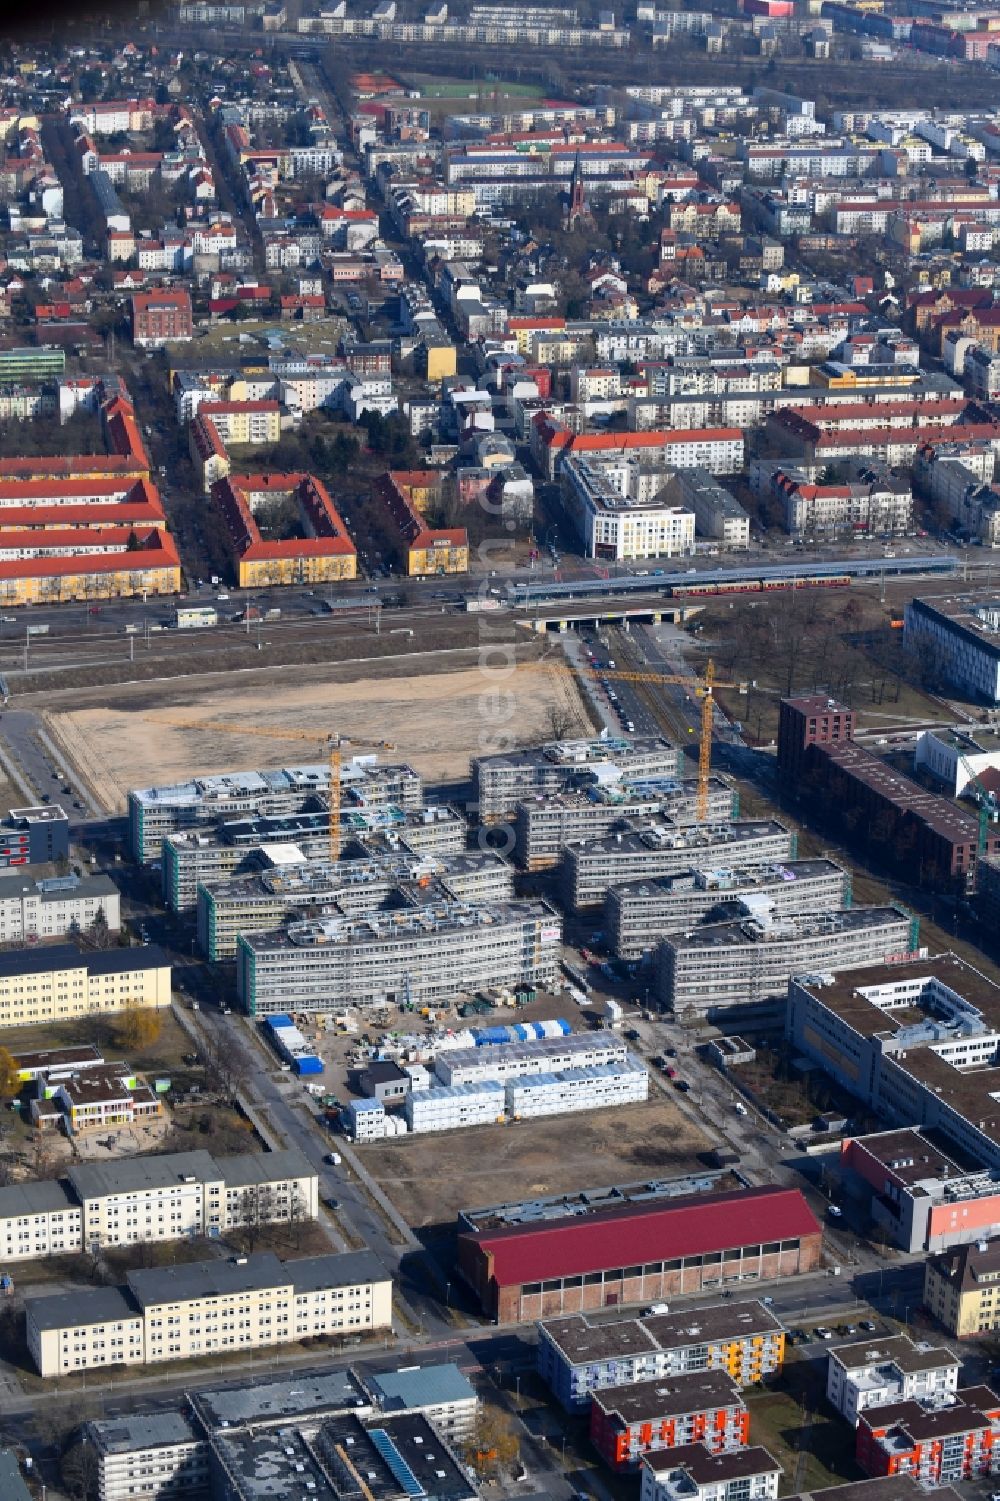 Berlin from the bird's eye view: Construction site to build a new office and commercial building Allianz Campus Berlin in the district Johannisthal - Adlershof in Berlin